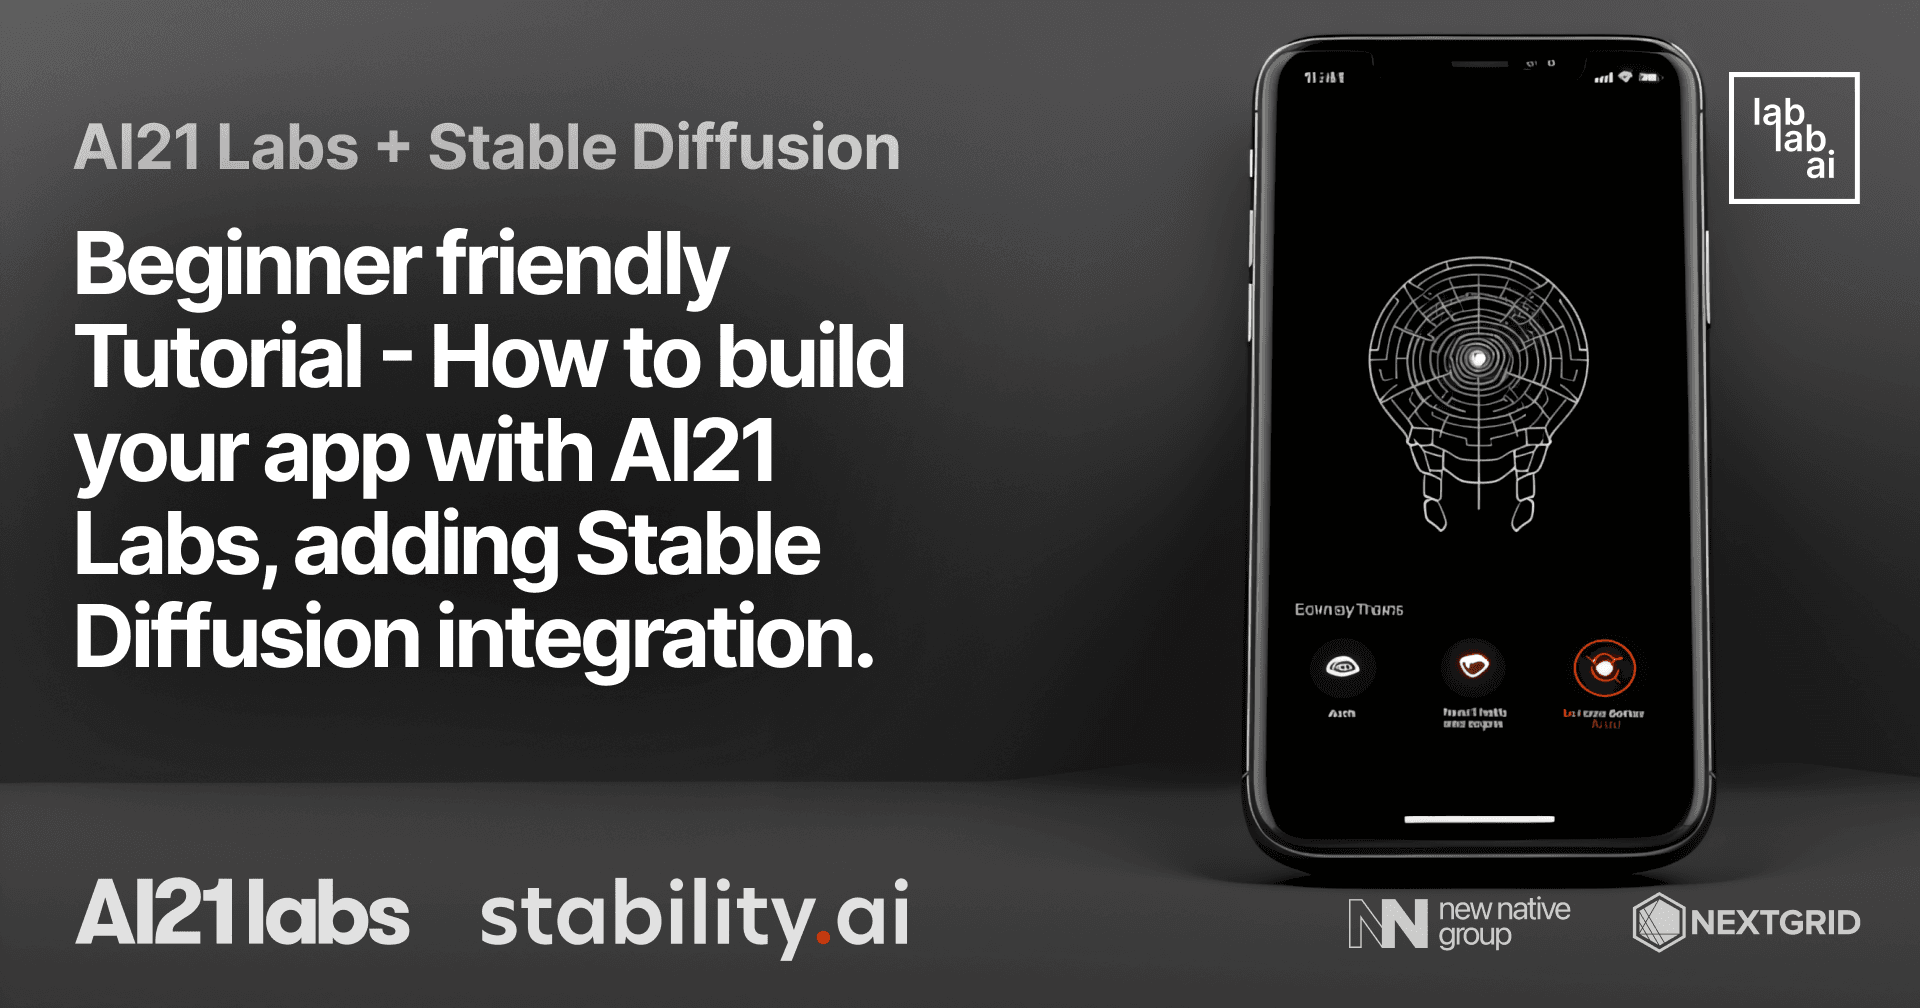 AI21 Labs + Stable Diffusion Tutorial: Beginner friendly Tutorial - How to build your app with AI21 Labs, adding Stable Diffusion integration.